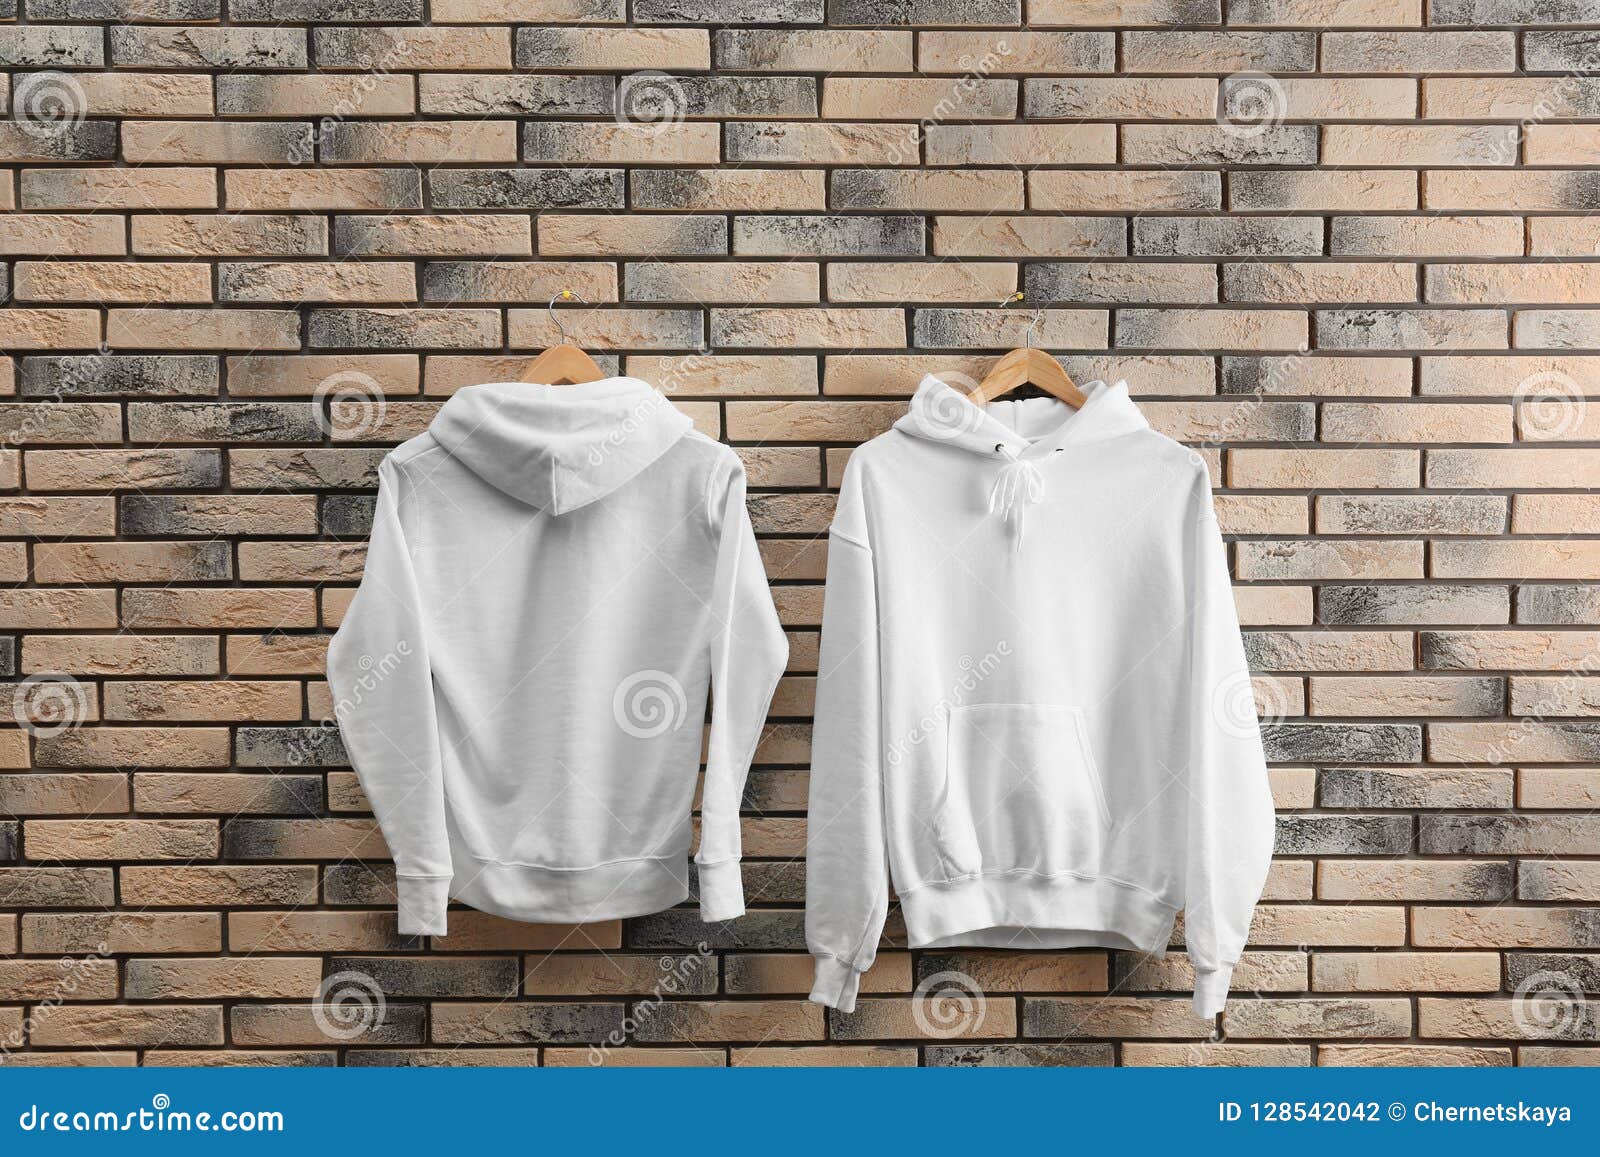 Download New Hoodie Sweaters With Hangers On Brick Wall Stock Photo ...